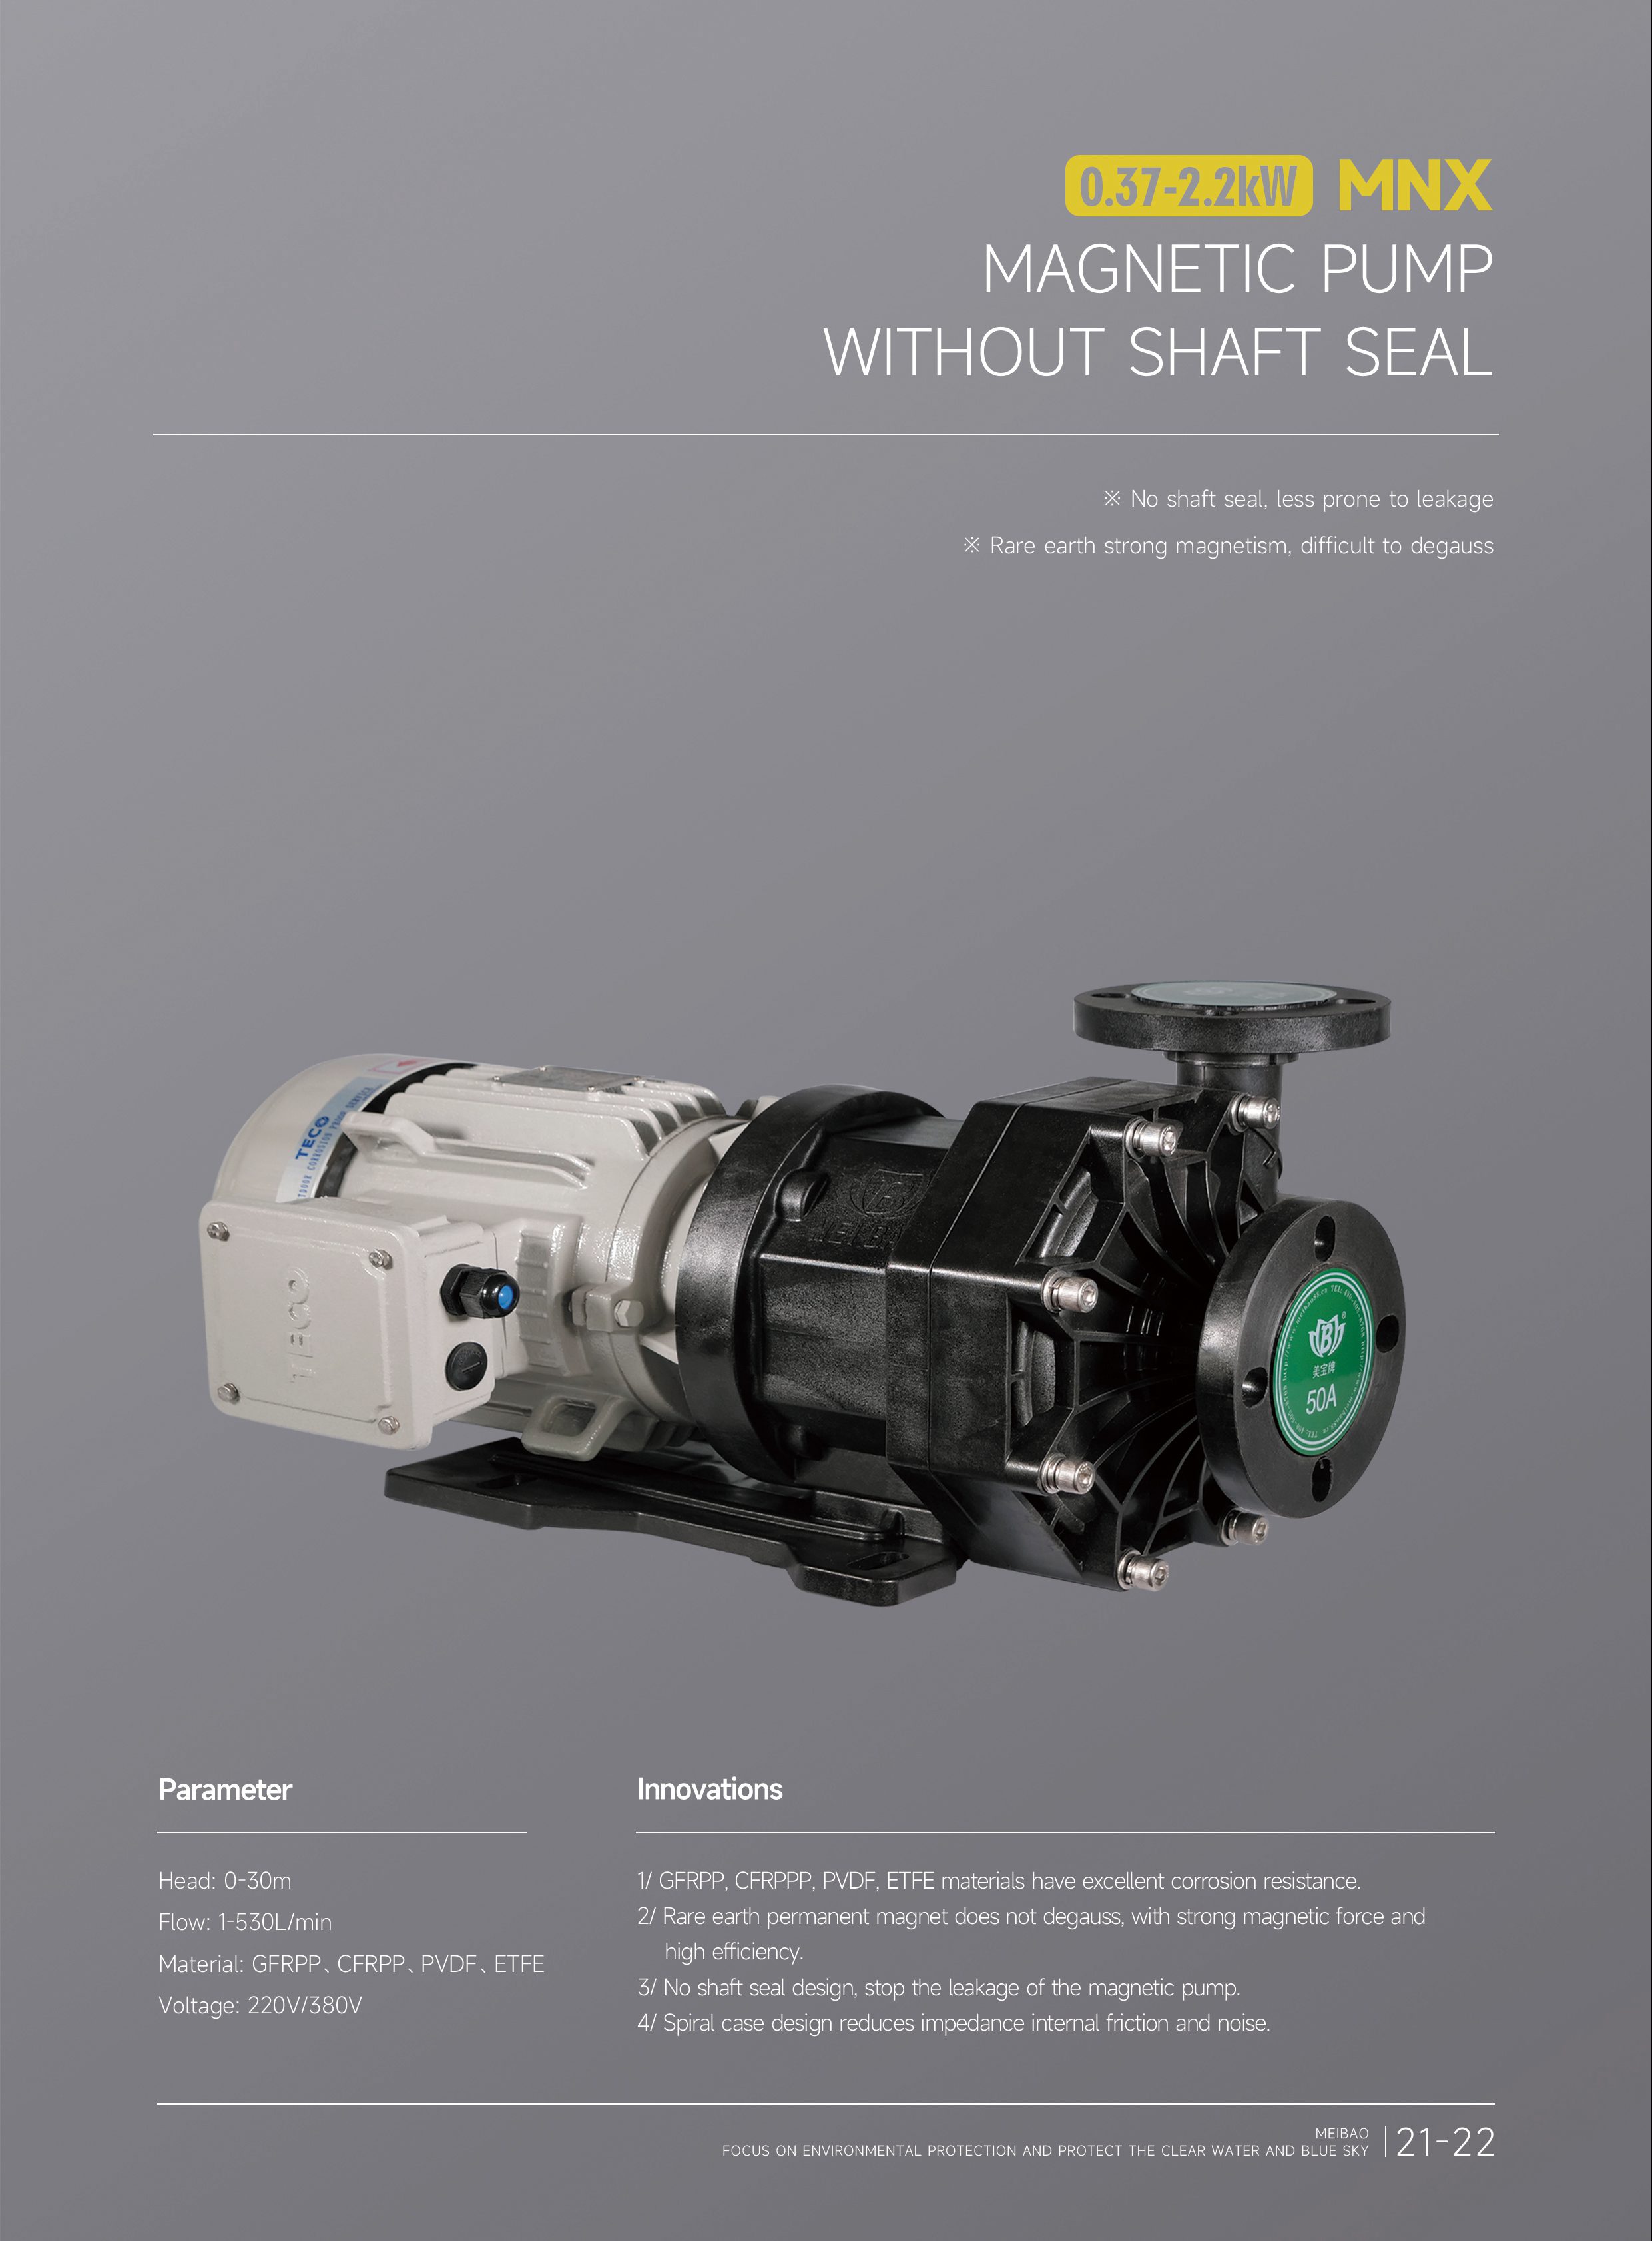 magnetic pump without shaft seal(无轴封磁力泵).jpg